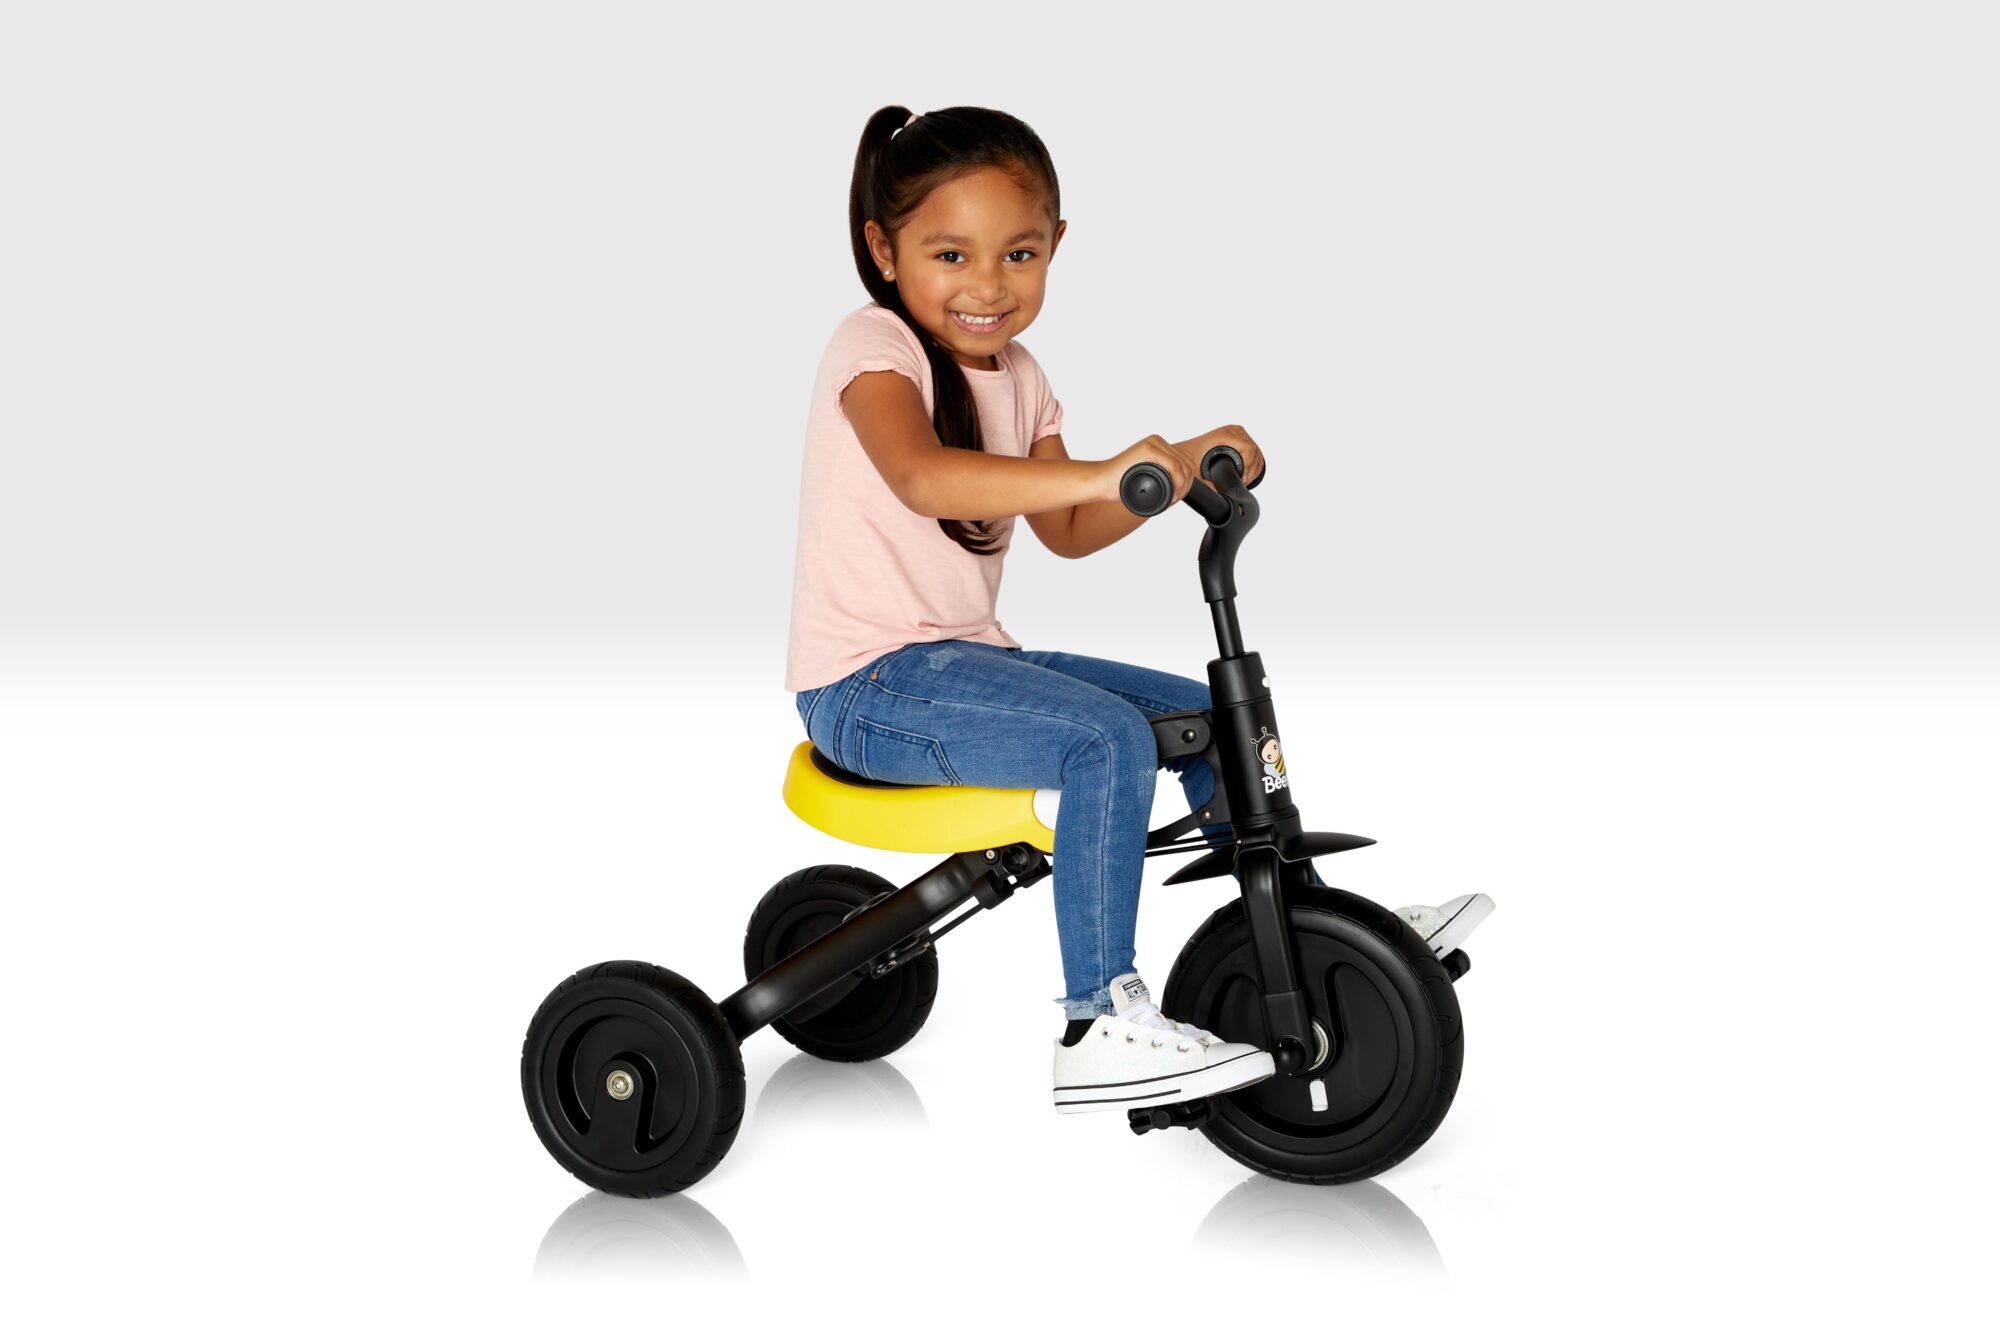 No Pedals Lil' Rider 2-in-1 Wooden Balance Bike & Push Tricycle- Ride-On Toy with Easy Grip Handles Ages 18 Months and Up Red Rubber Wheels for Boys and Girls 